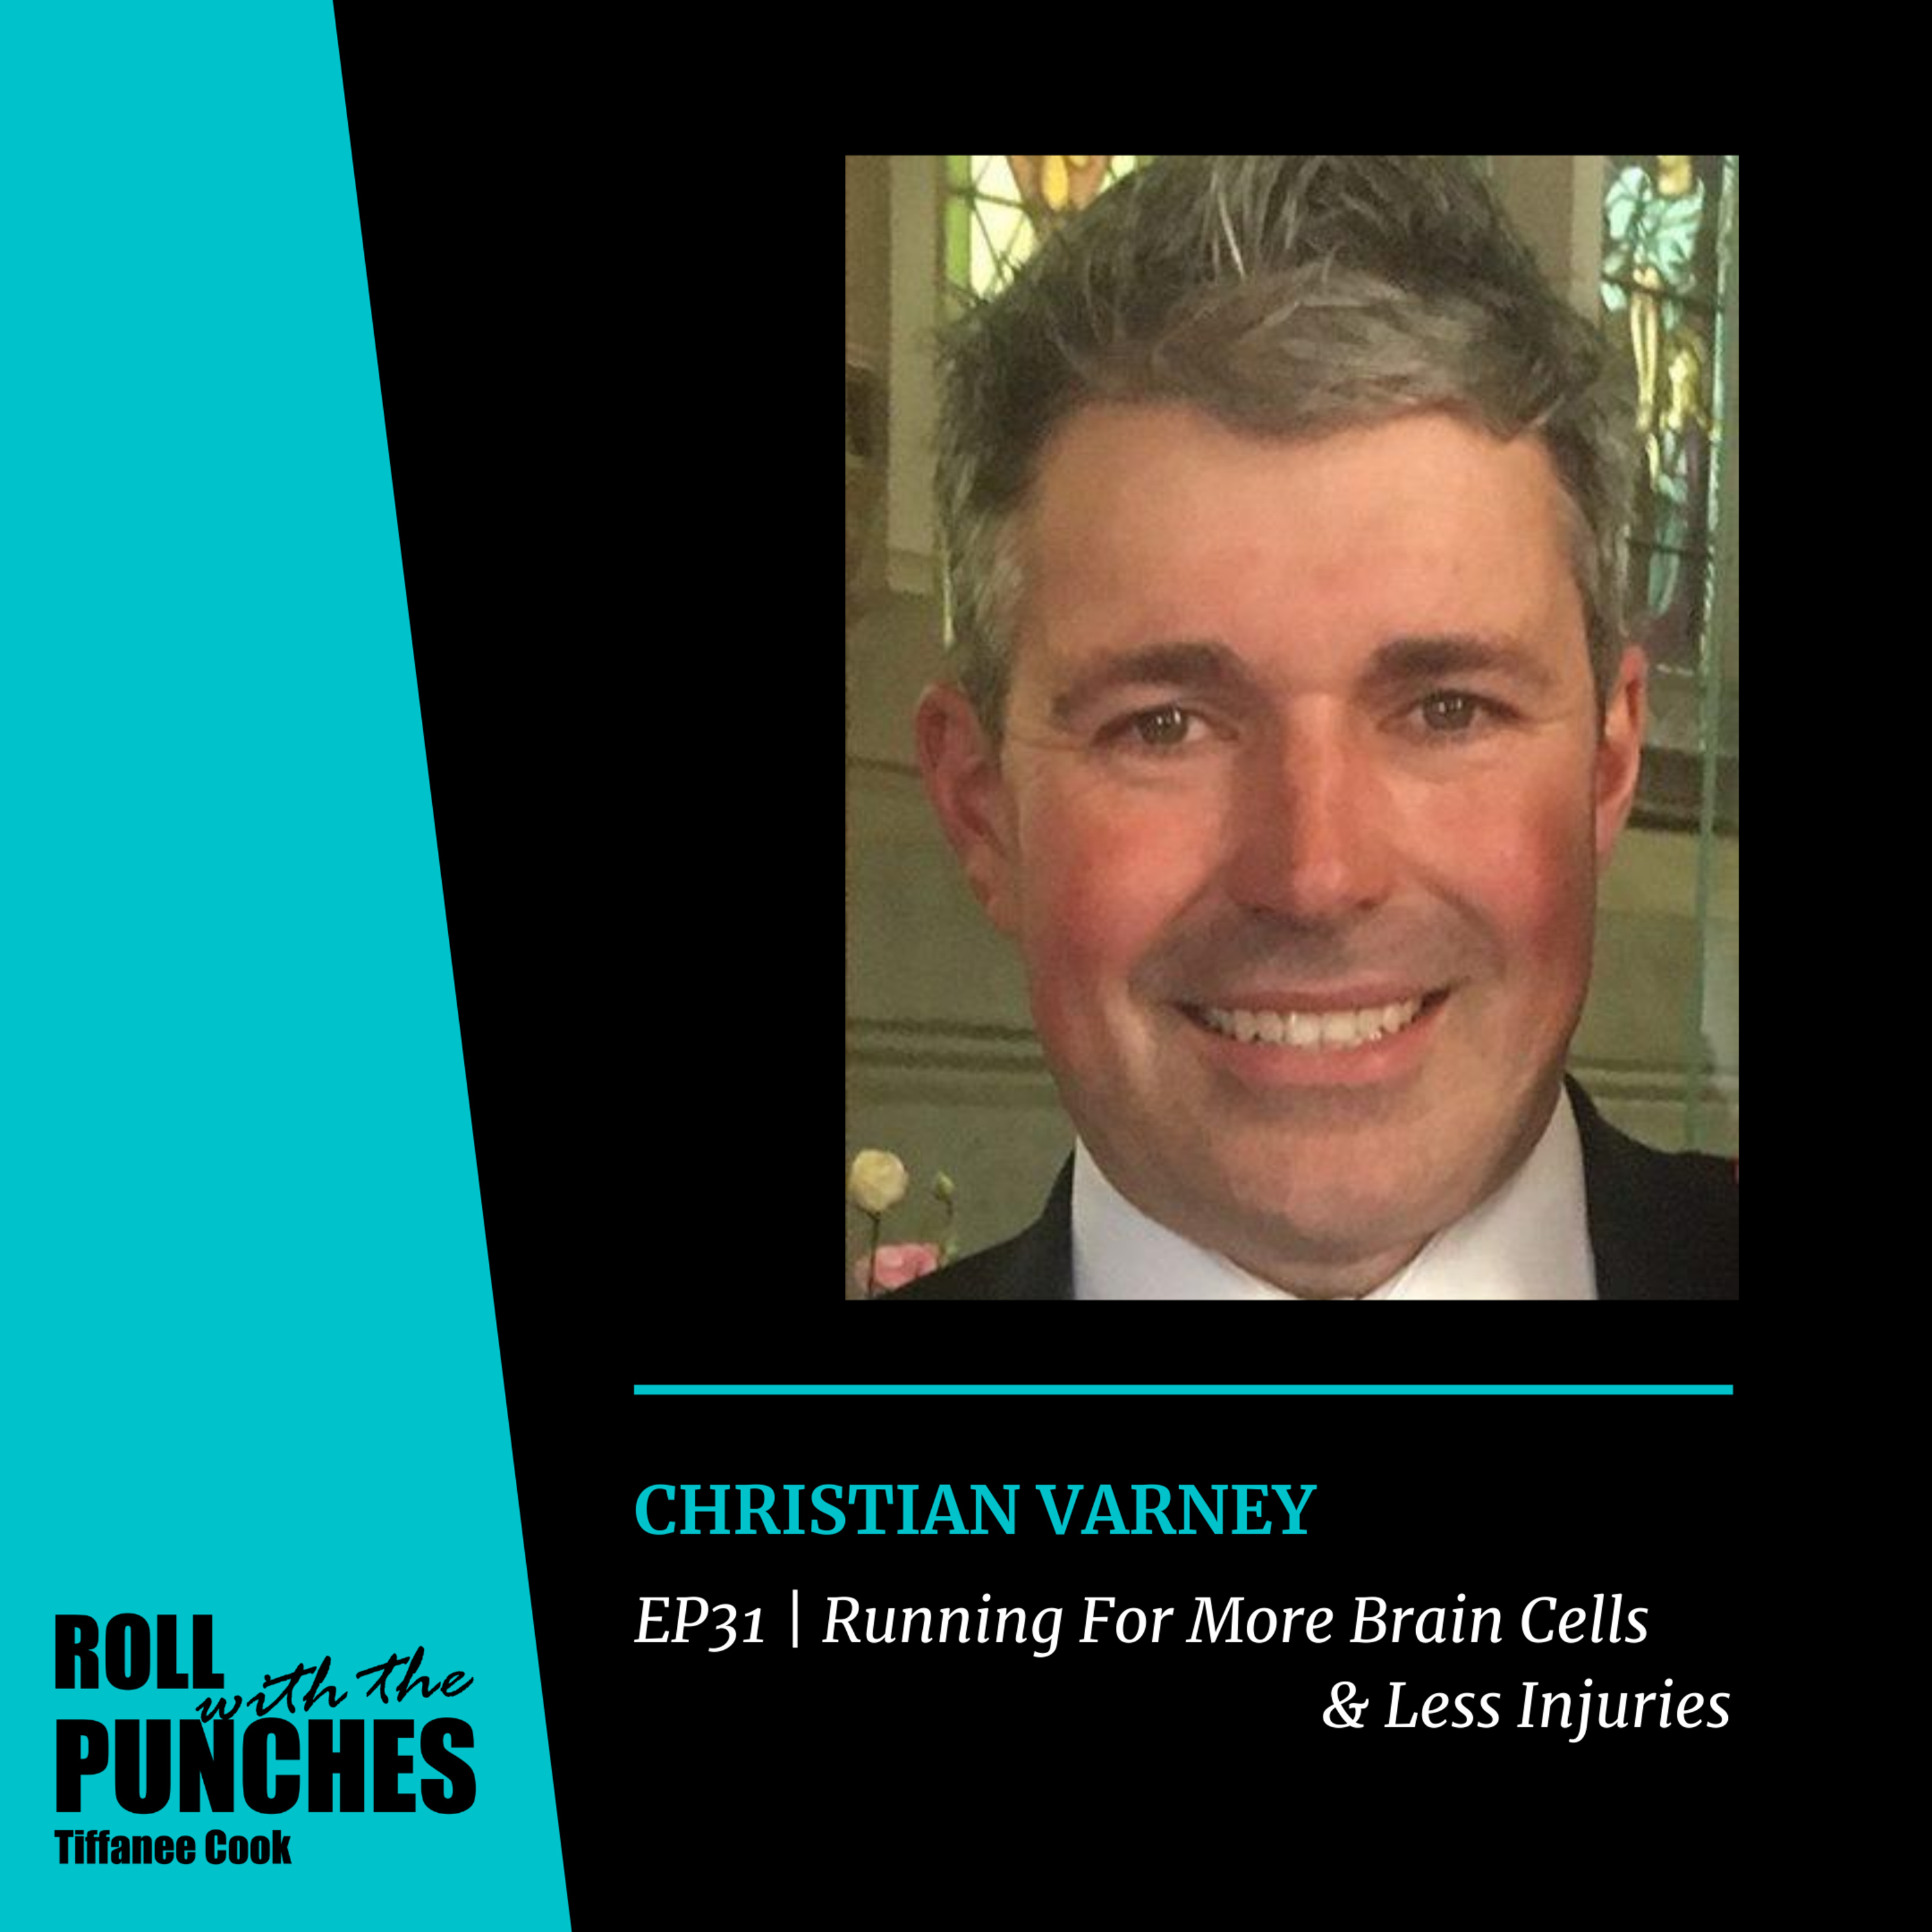 EP31 Running For More Brain Cells & Less Injuries | Christian Varney